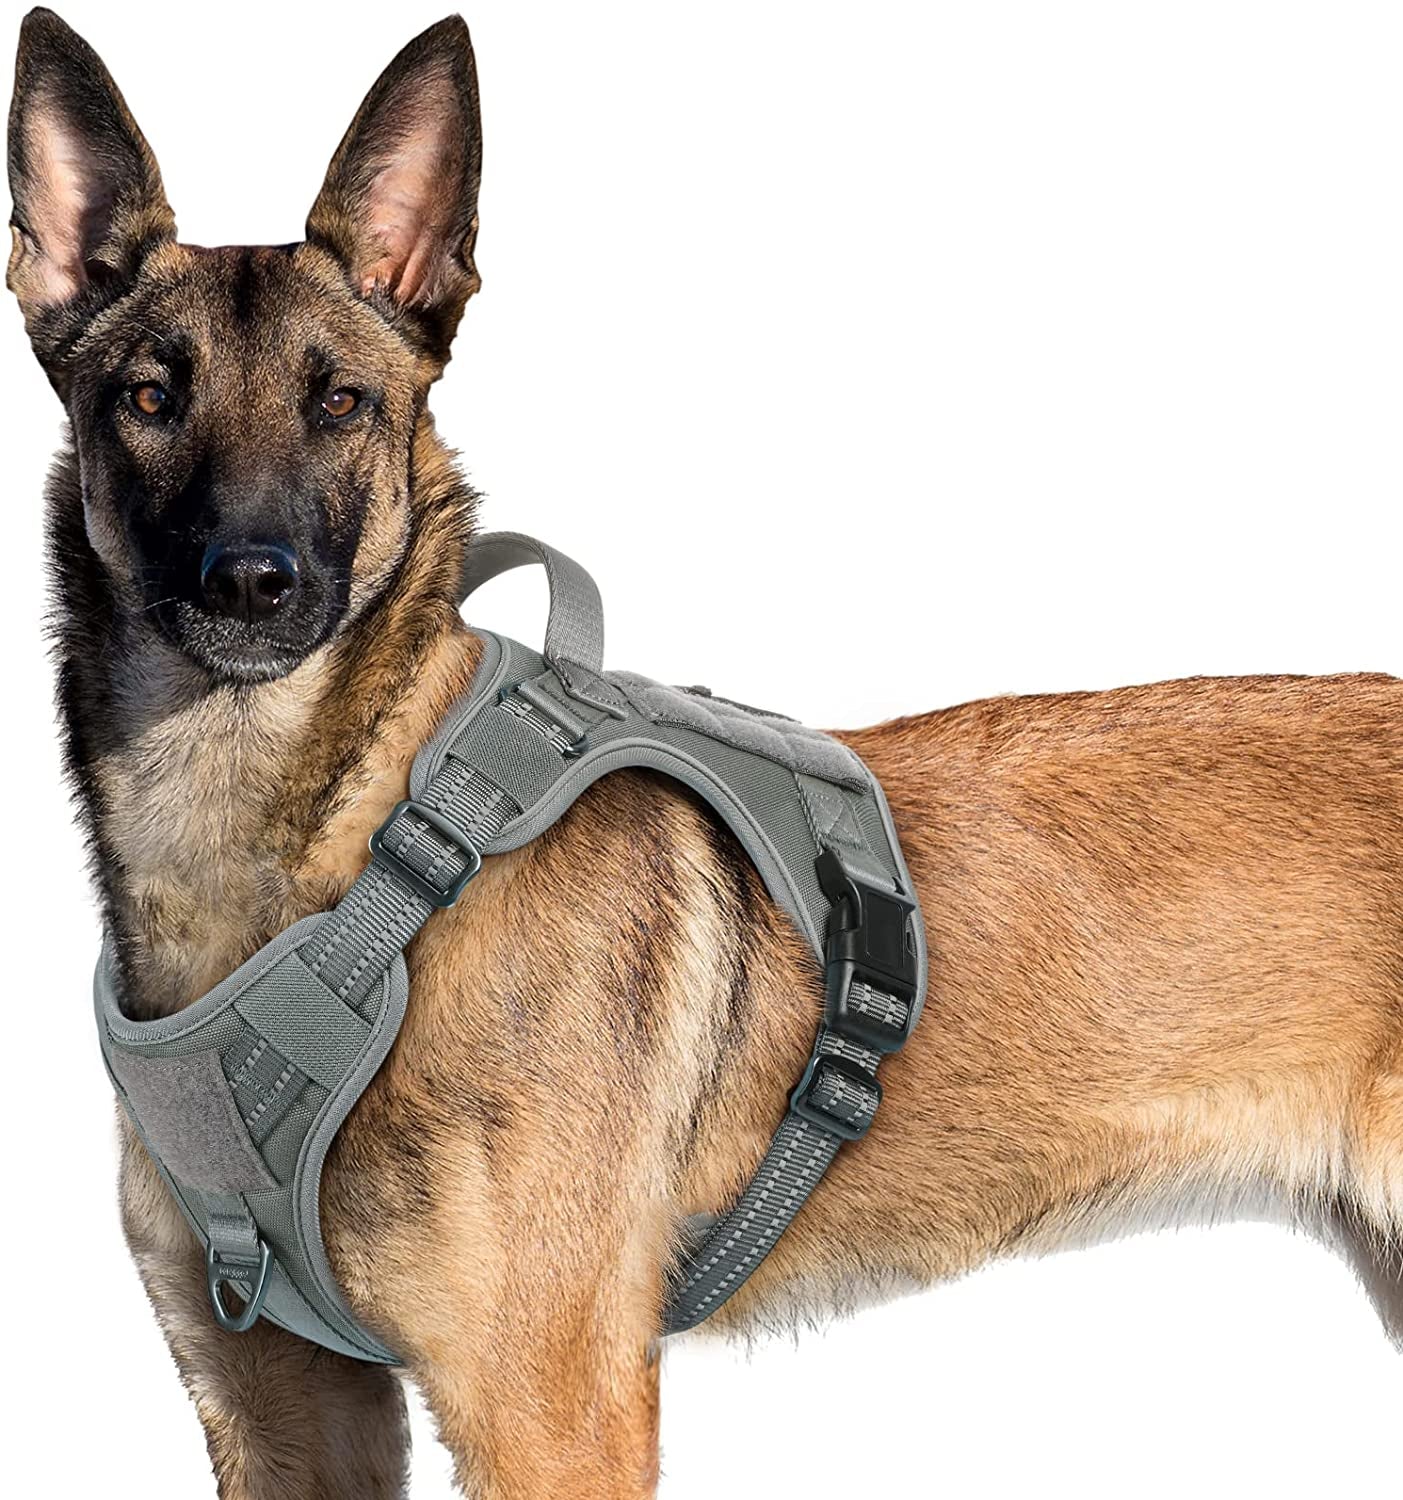 Tactical Dog Harness Reflective Military Molle Dog Vest for Outdoor Training